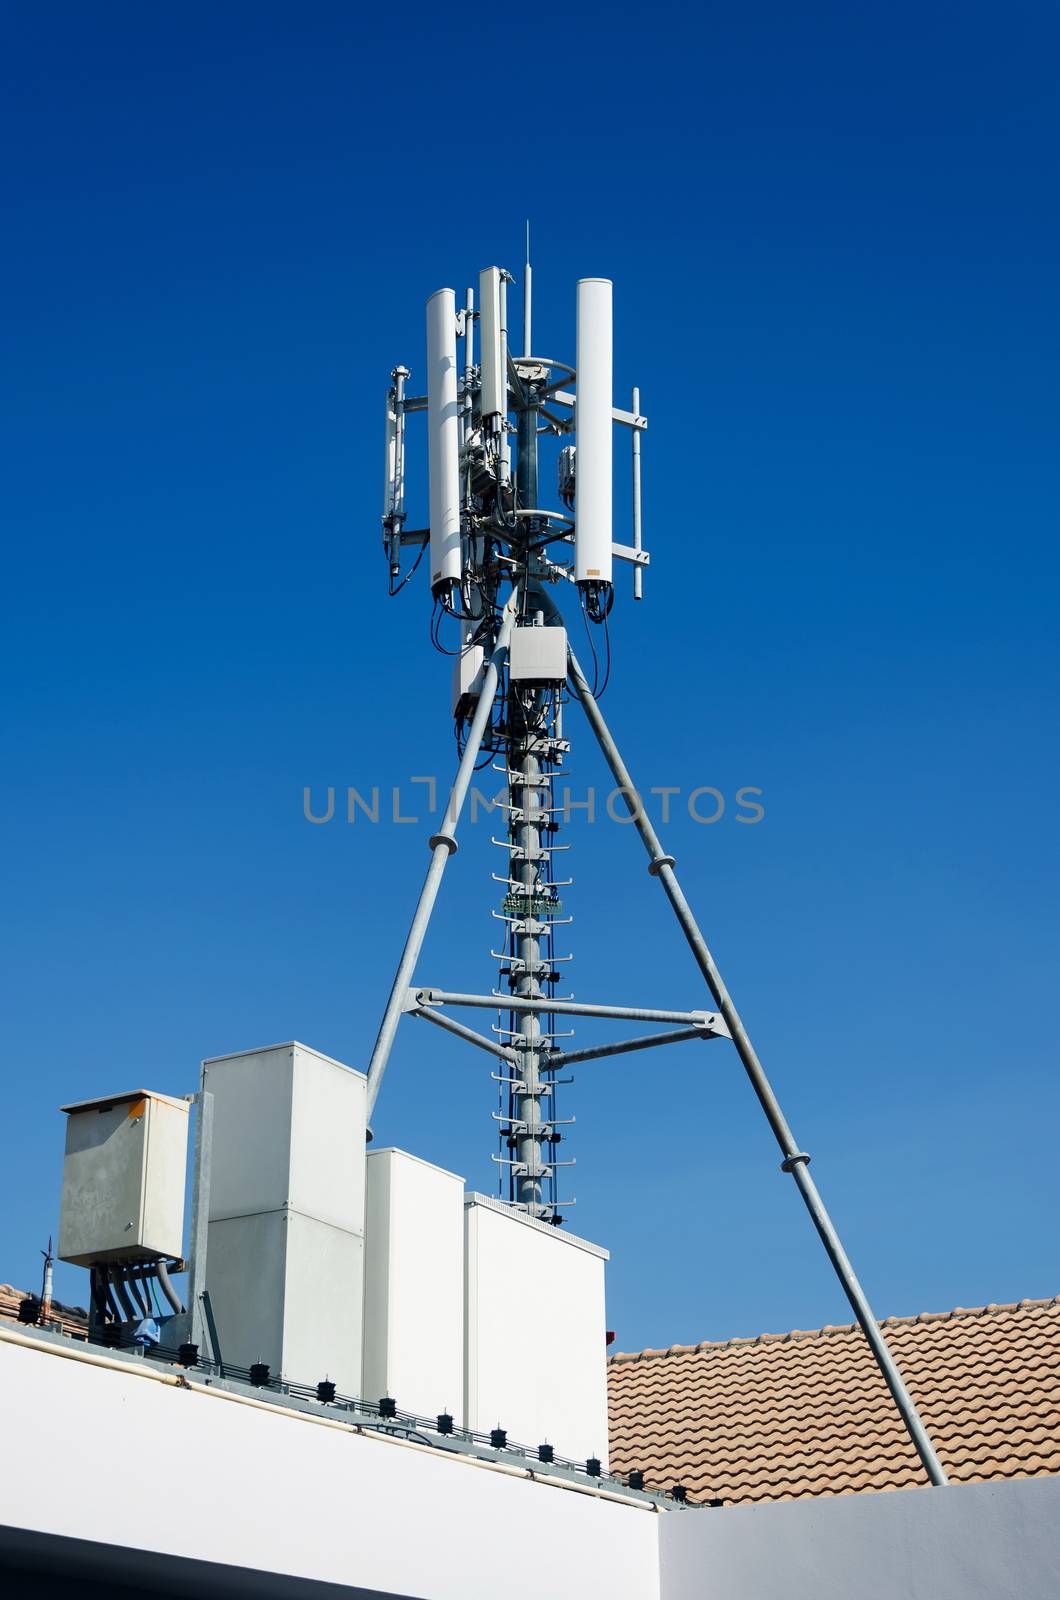 Mobile phone network antenna by nop16